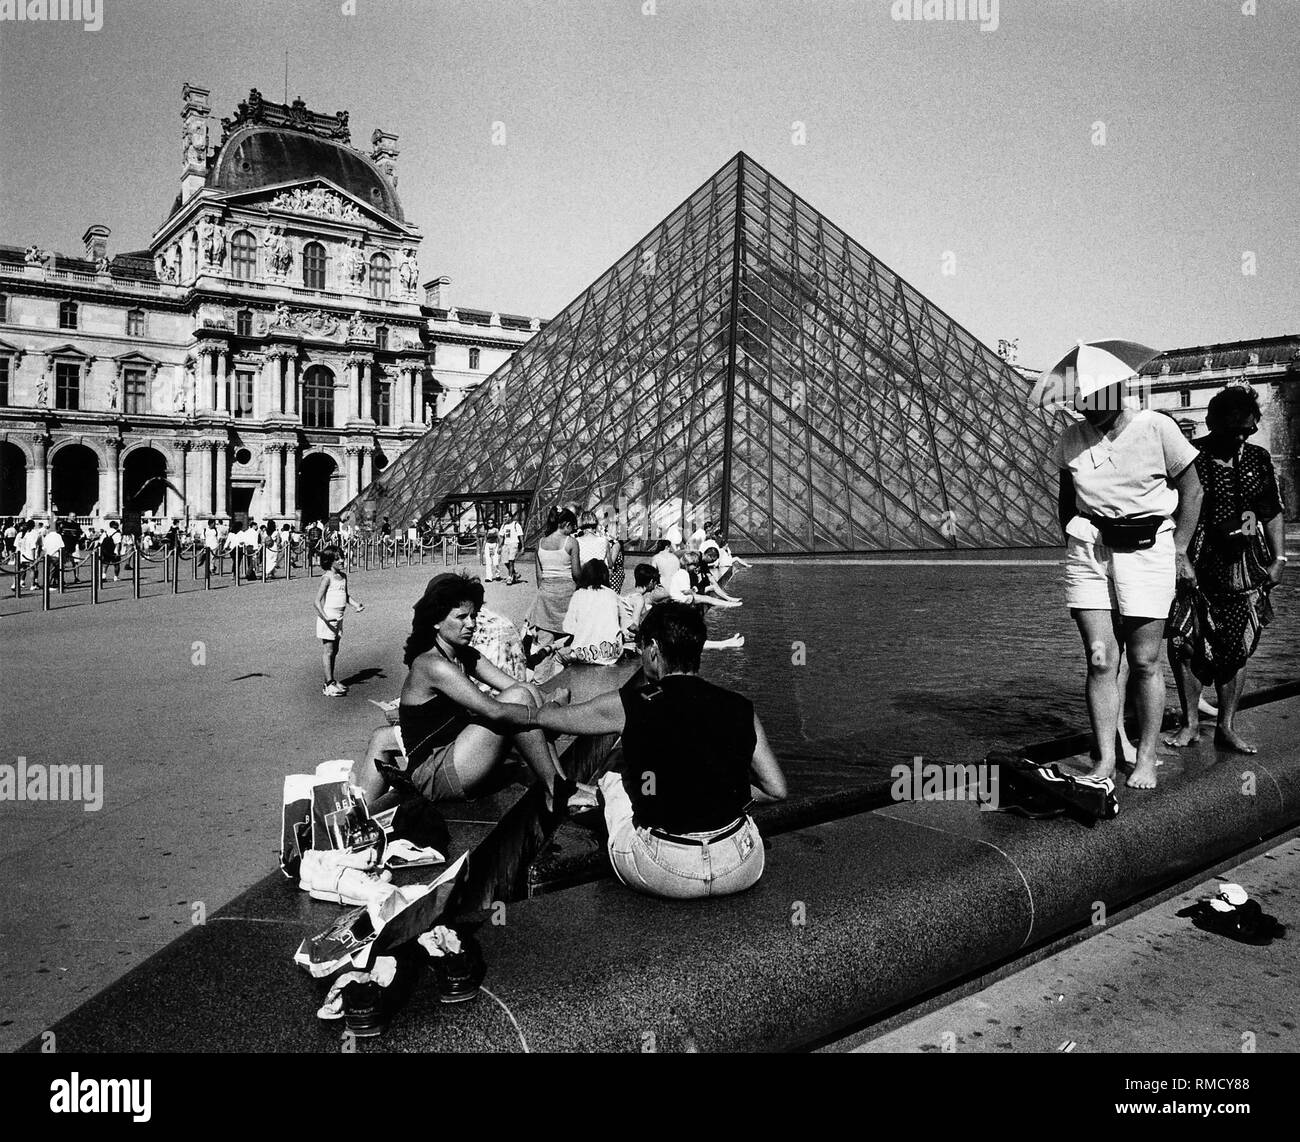 The main entrance to the Louvre leads over the 21-meter-high glass pyramid created by architect Leoh Ming Pei in the 'Cour Napoleon' in 1989. Stock Photo